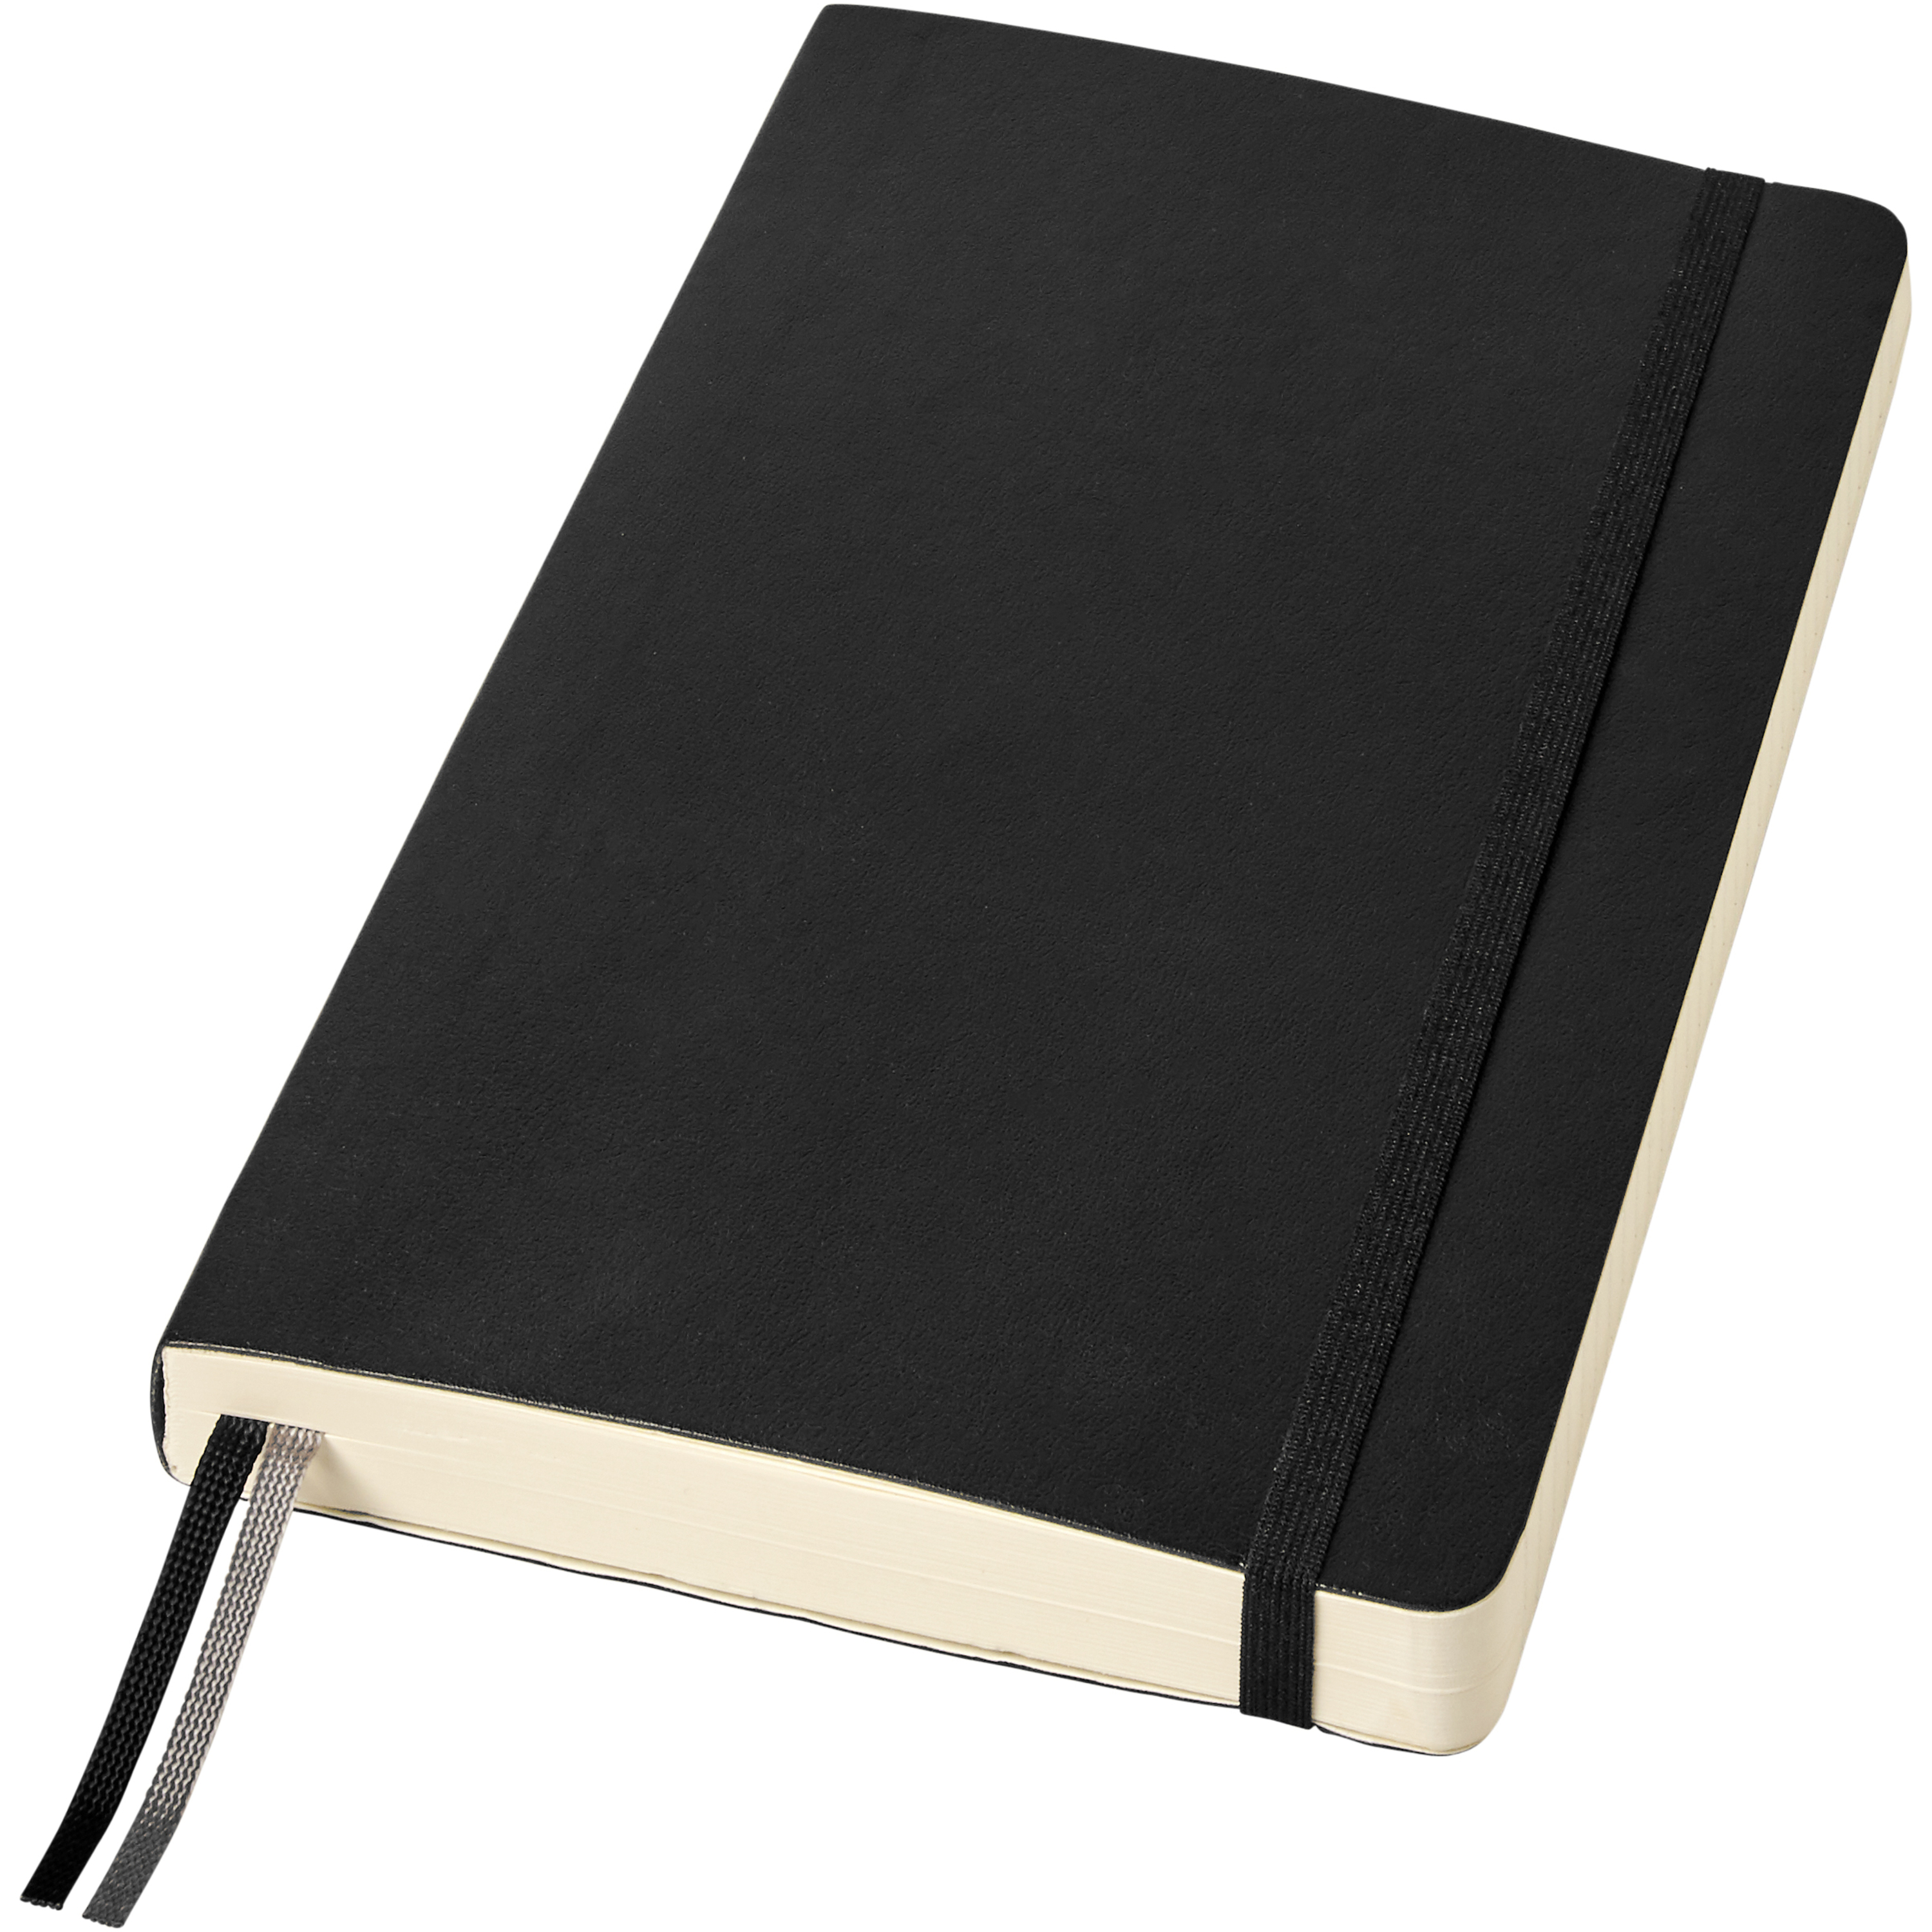 Moleskine Classic Expanded L soft cover notebook - ruled